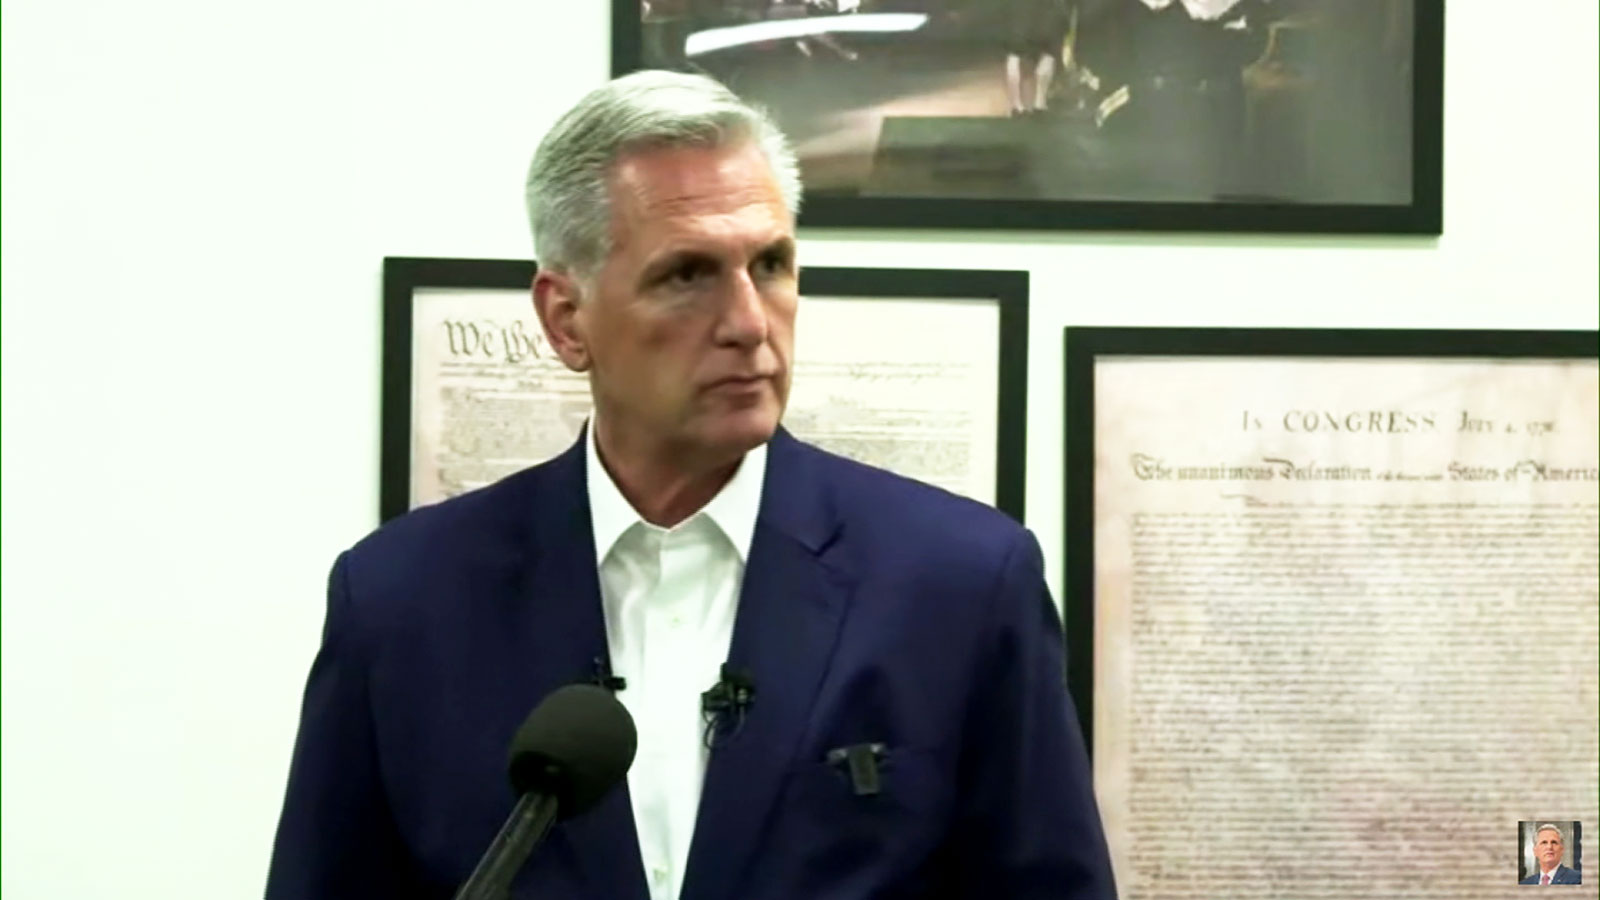 McCarthy speaks to reporters in his district on Thursday, August 3.